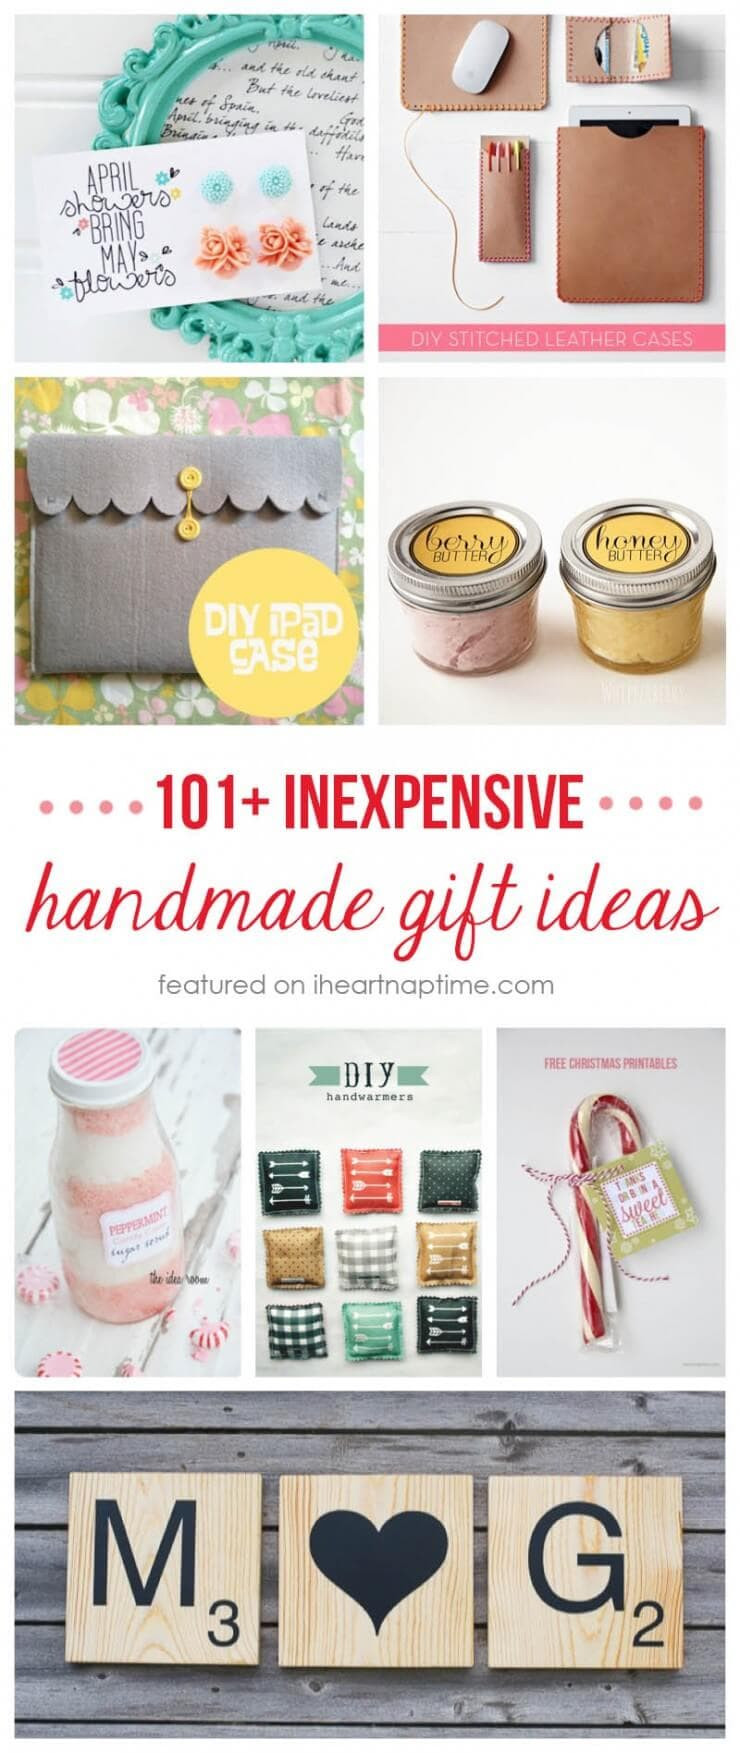 DIY Easy Christmas Gifts
 50 homemade t ideas to make for under $5 I Heart Nap Time